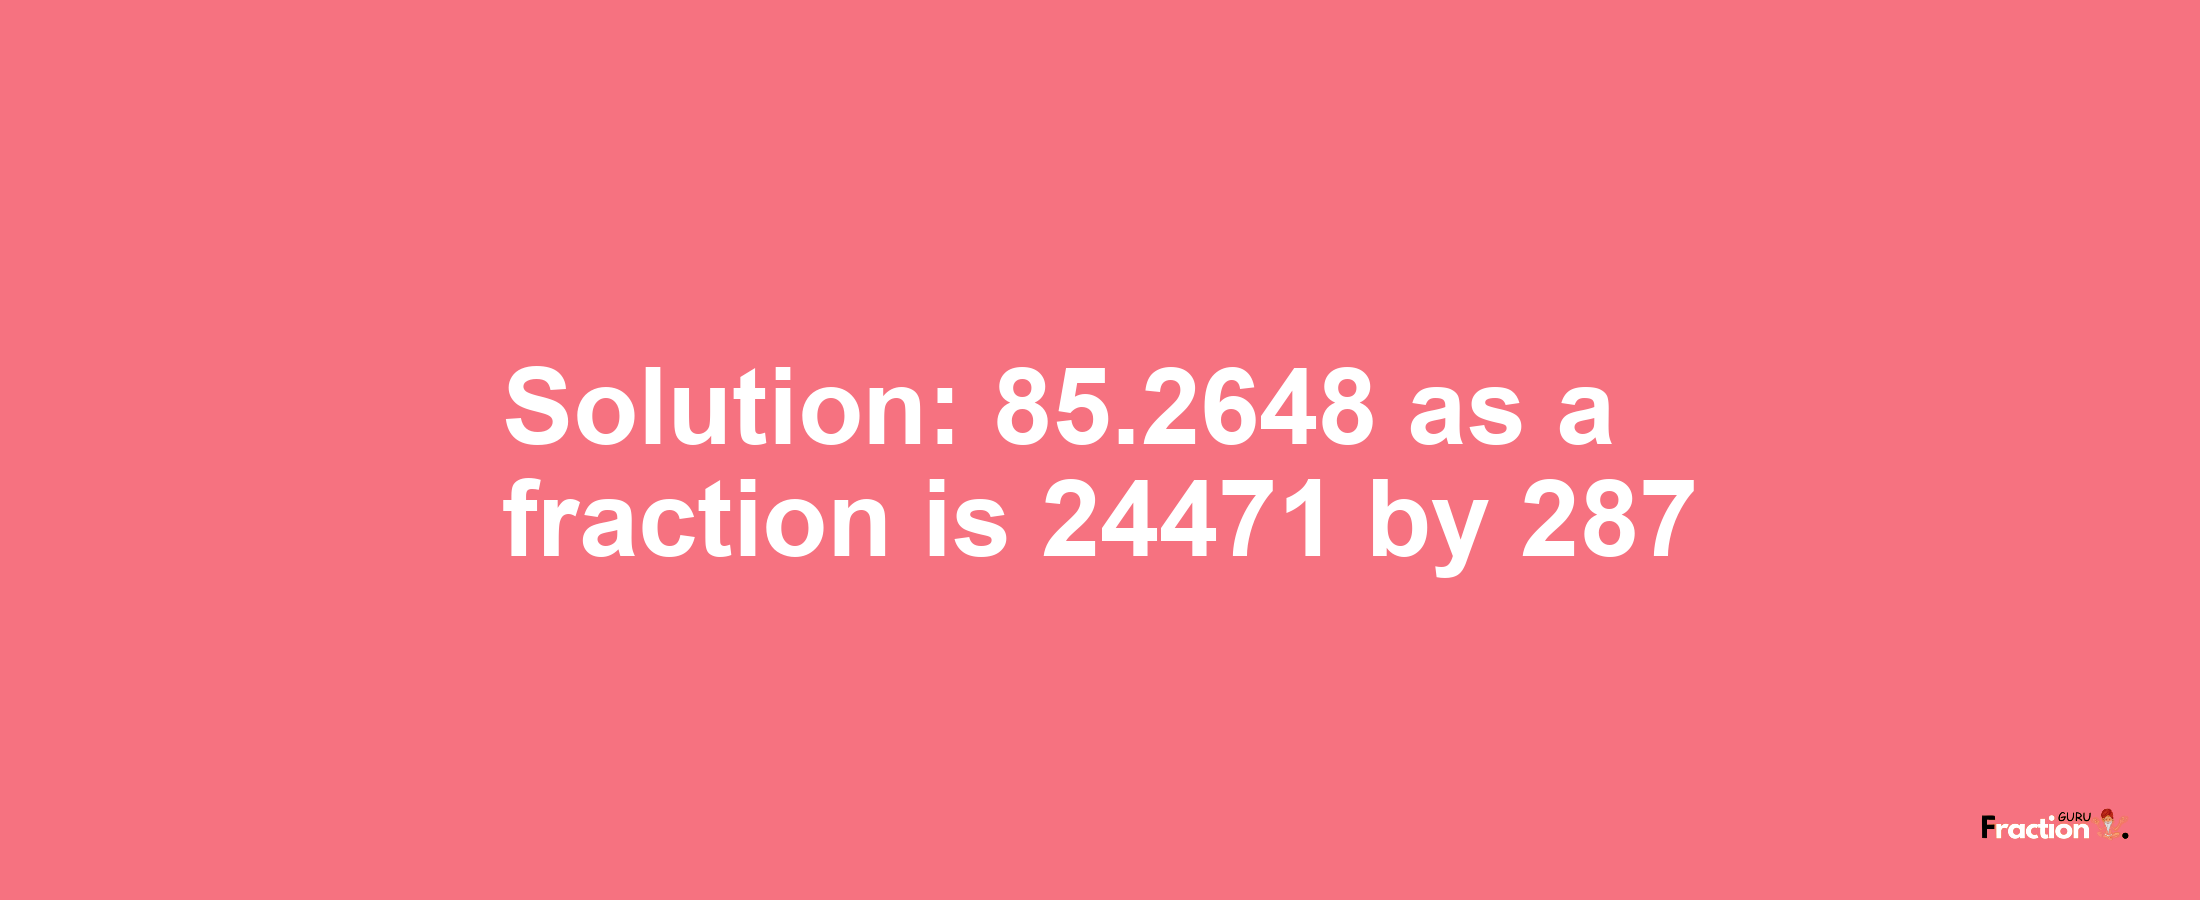 Solution:85.2648 as a fraction is 24471/287